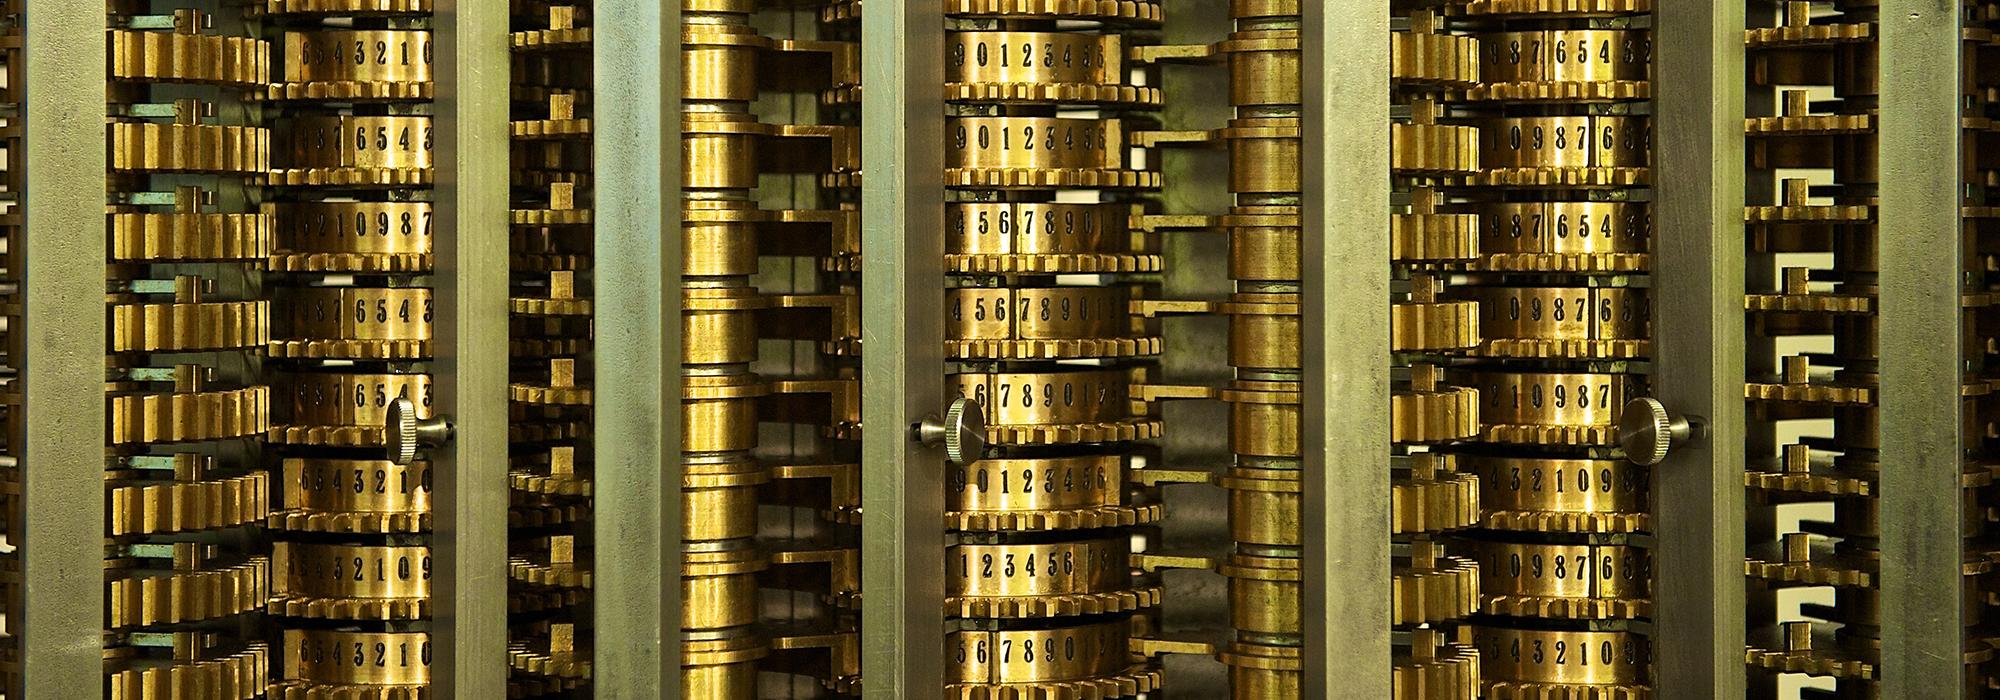 Babbage Difference Engine #2, by Larry Johnson (www.flickr.com/drljohnson) used under CC-BY 2.0 license